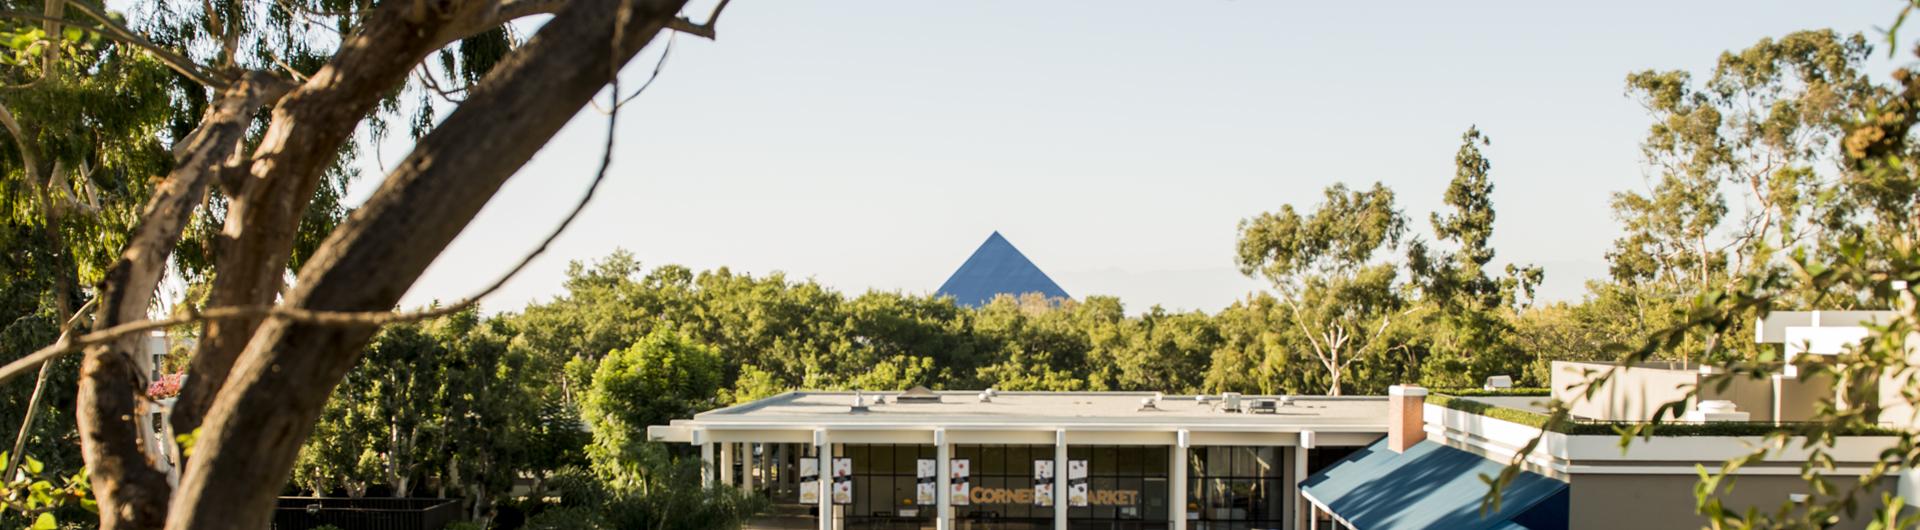 The iconic Walter Pyramid can be seen from upper campus peeking out above the tree line.